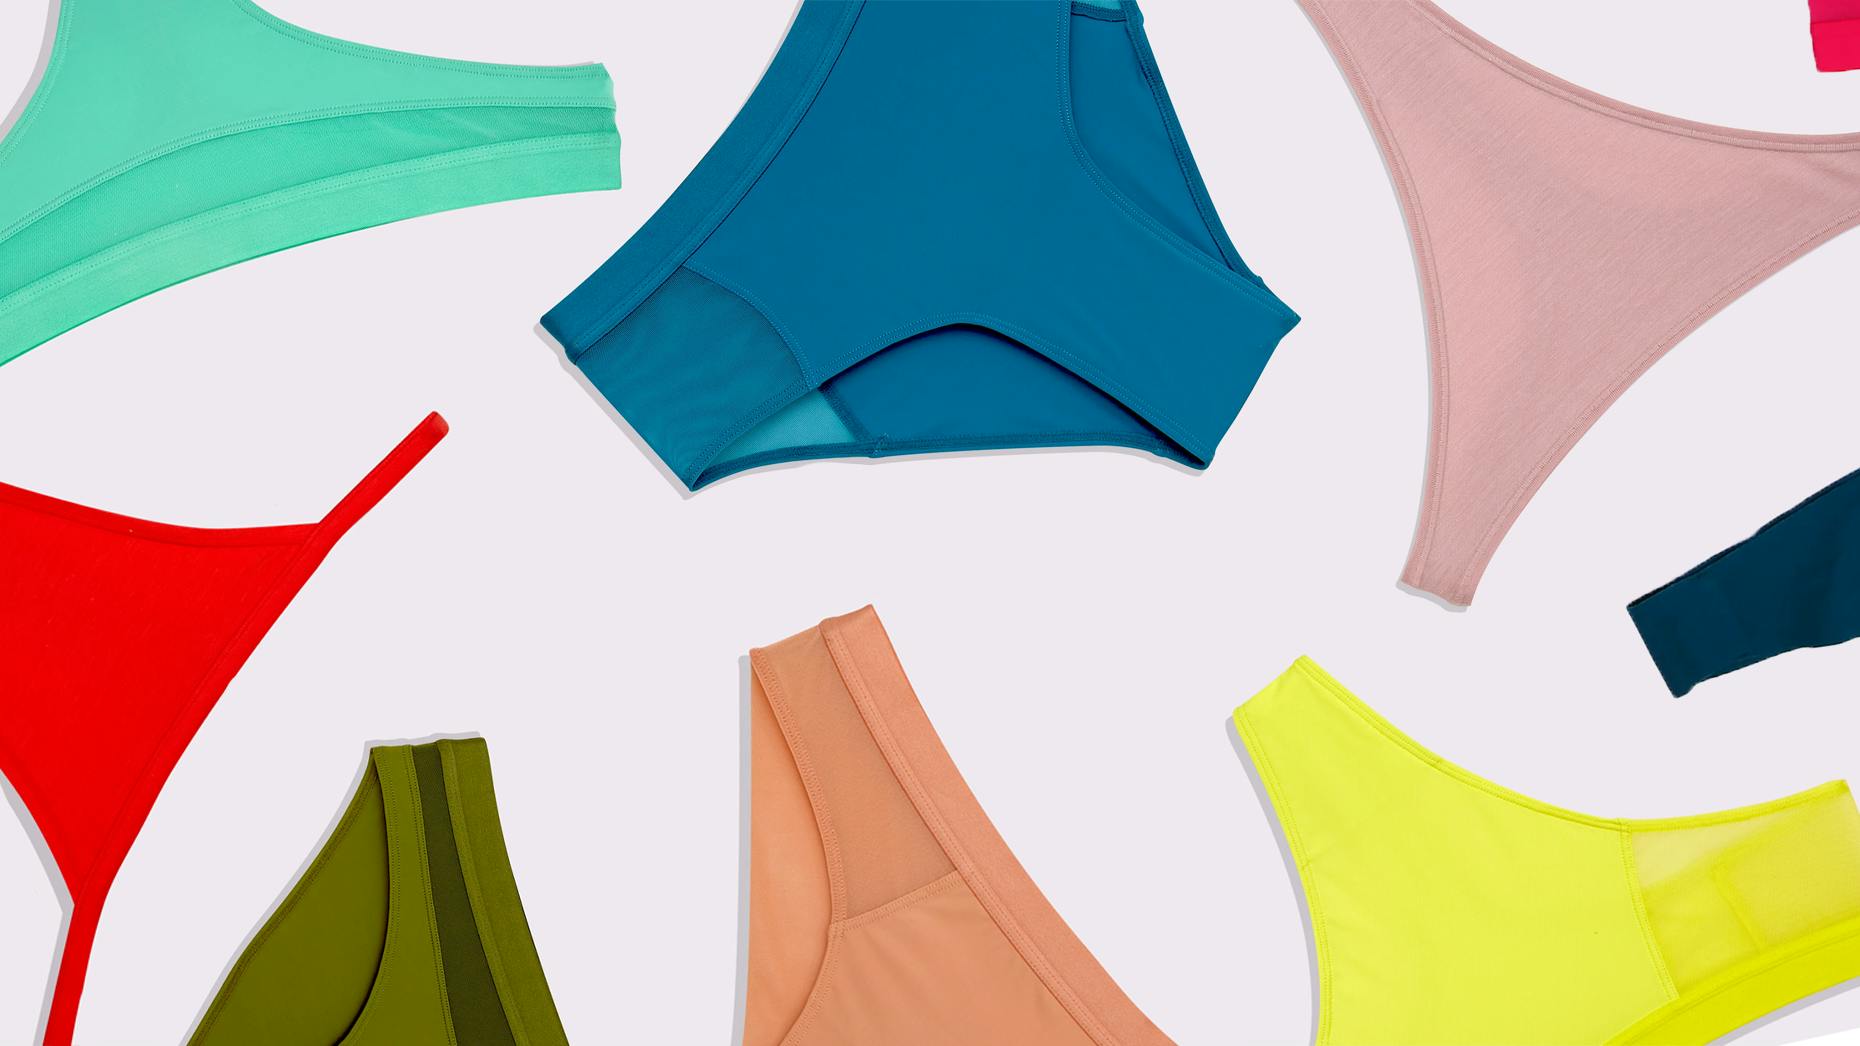 Lingerie start-up Cuup closes on $11 million funding round